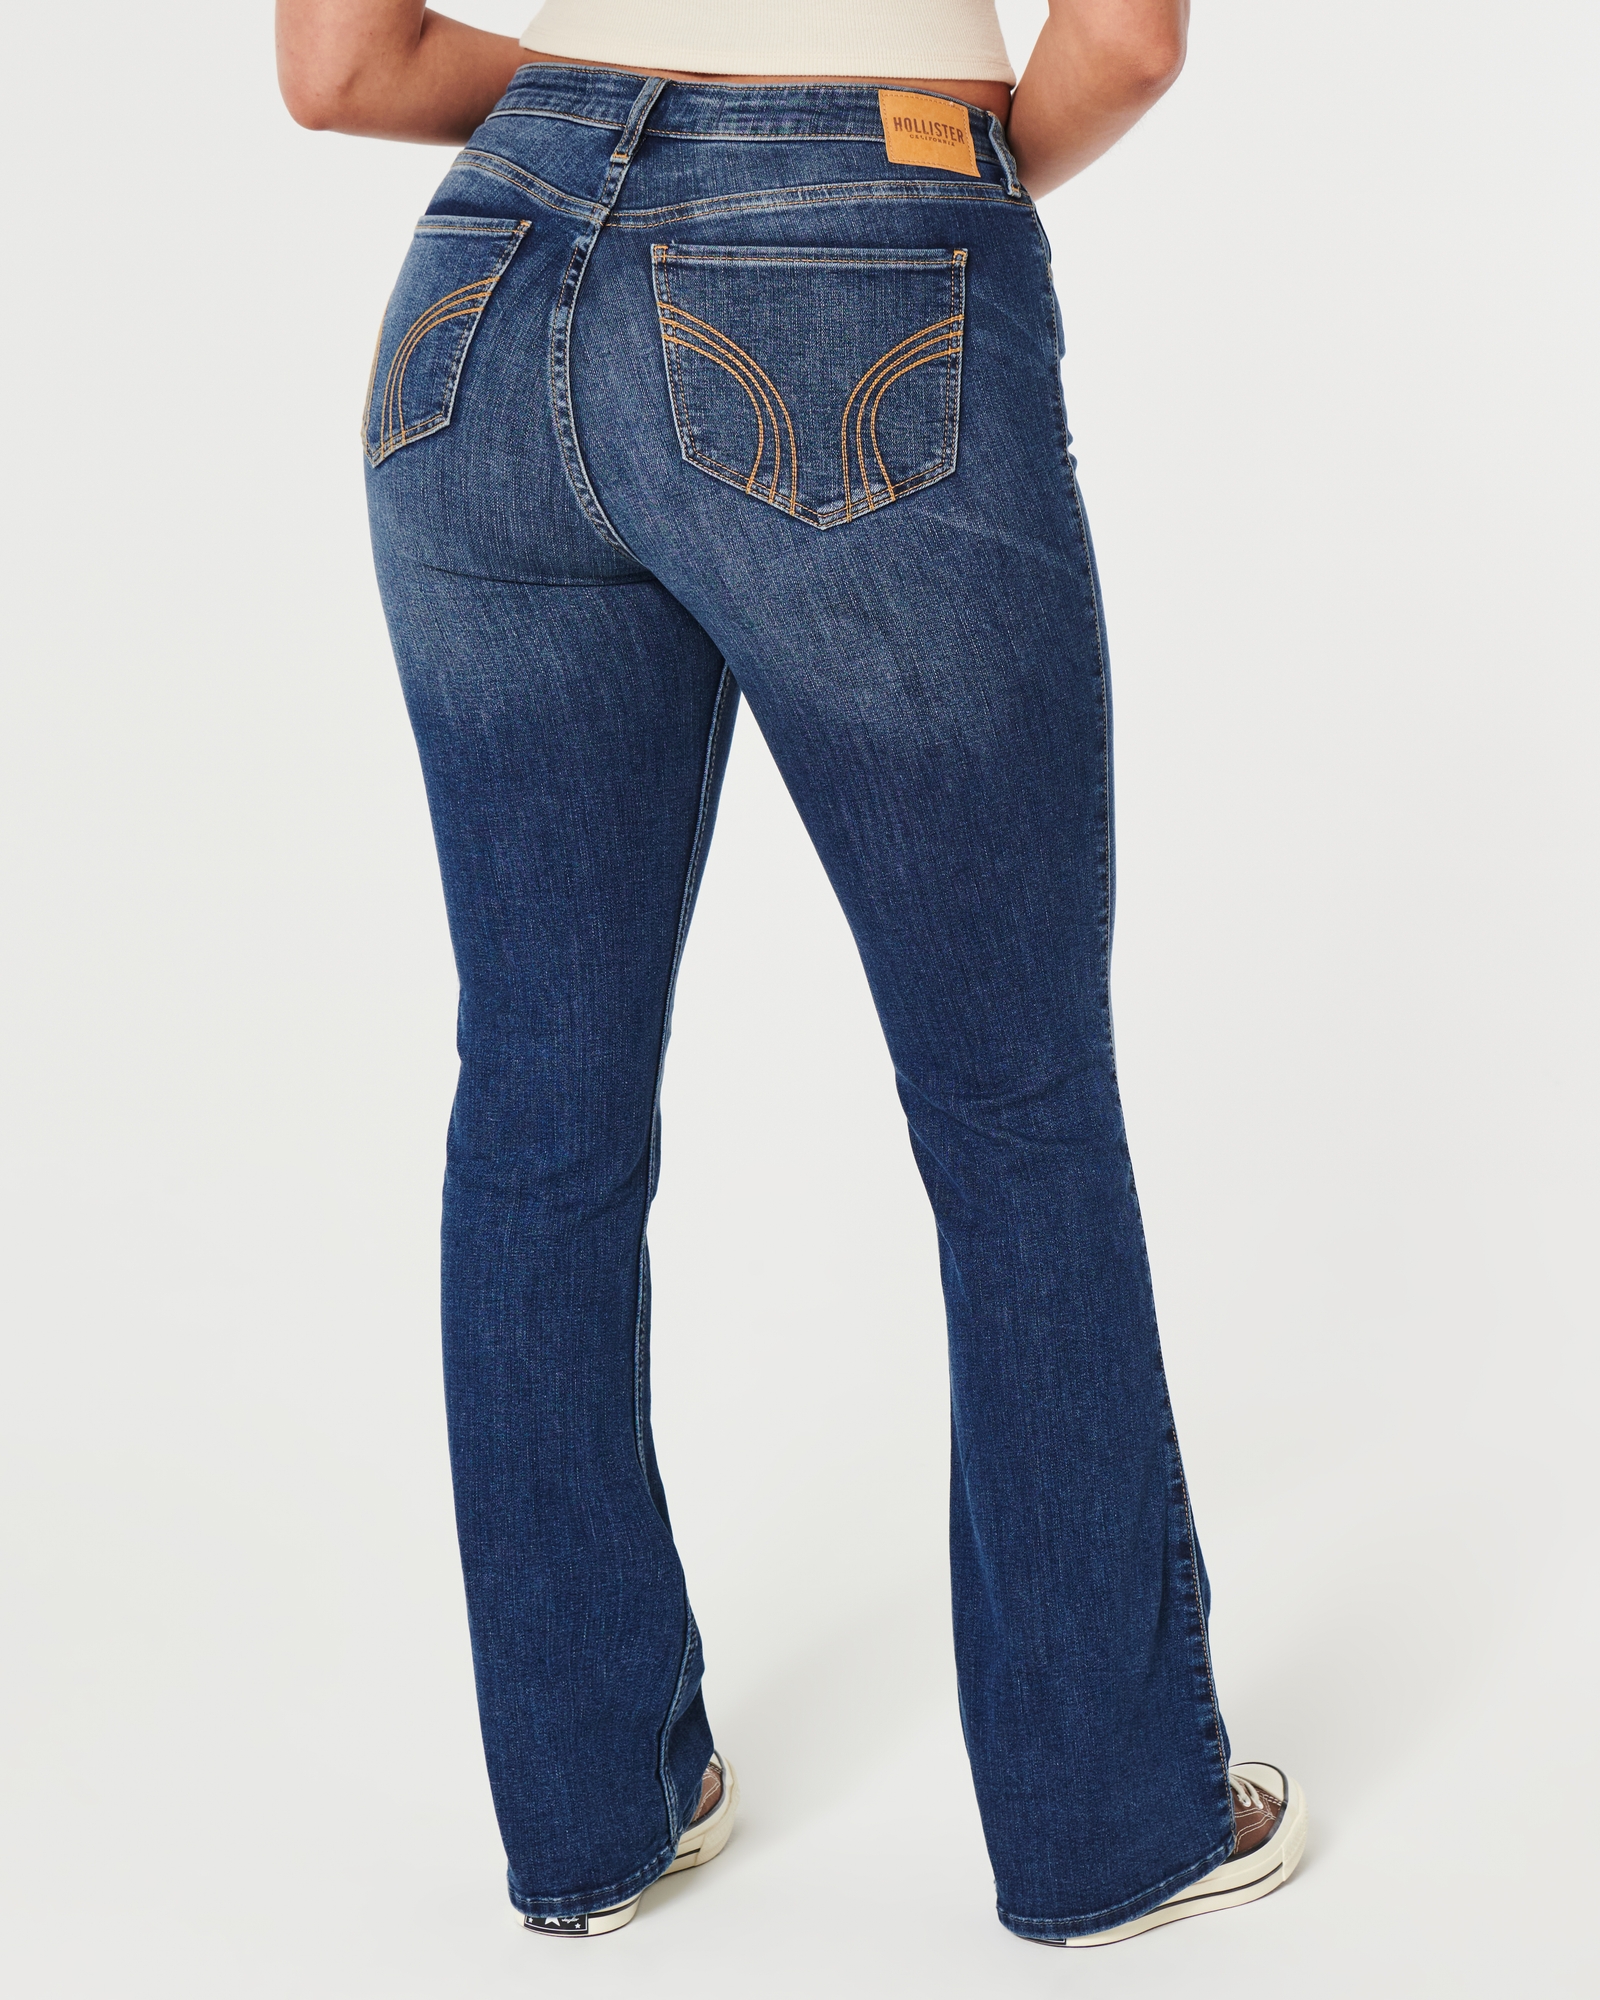 hollister mid rise jean jeggings , size 0S, never